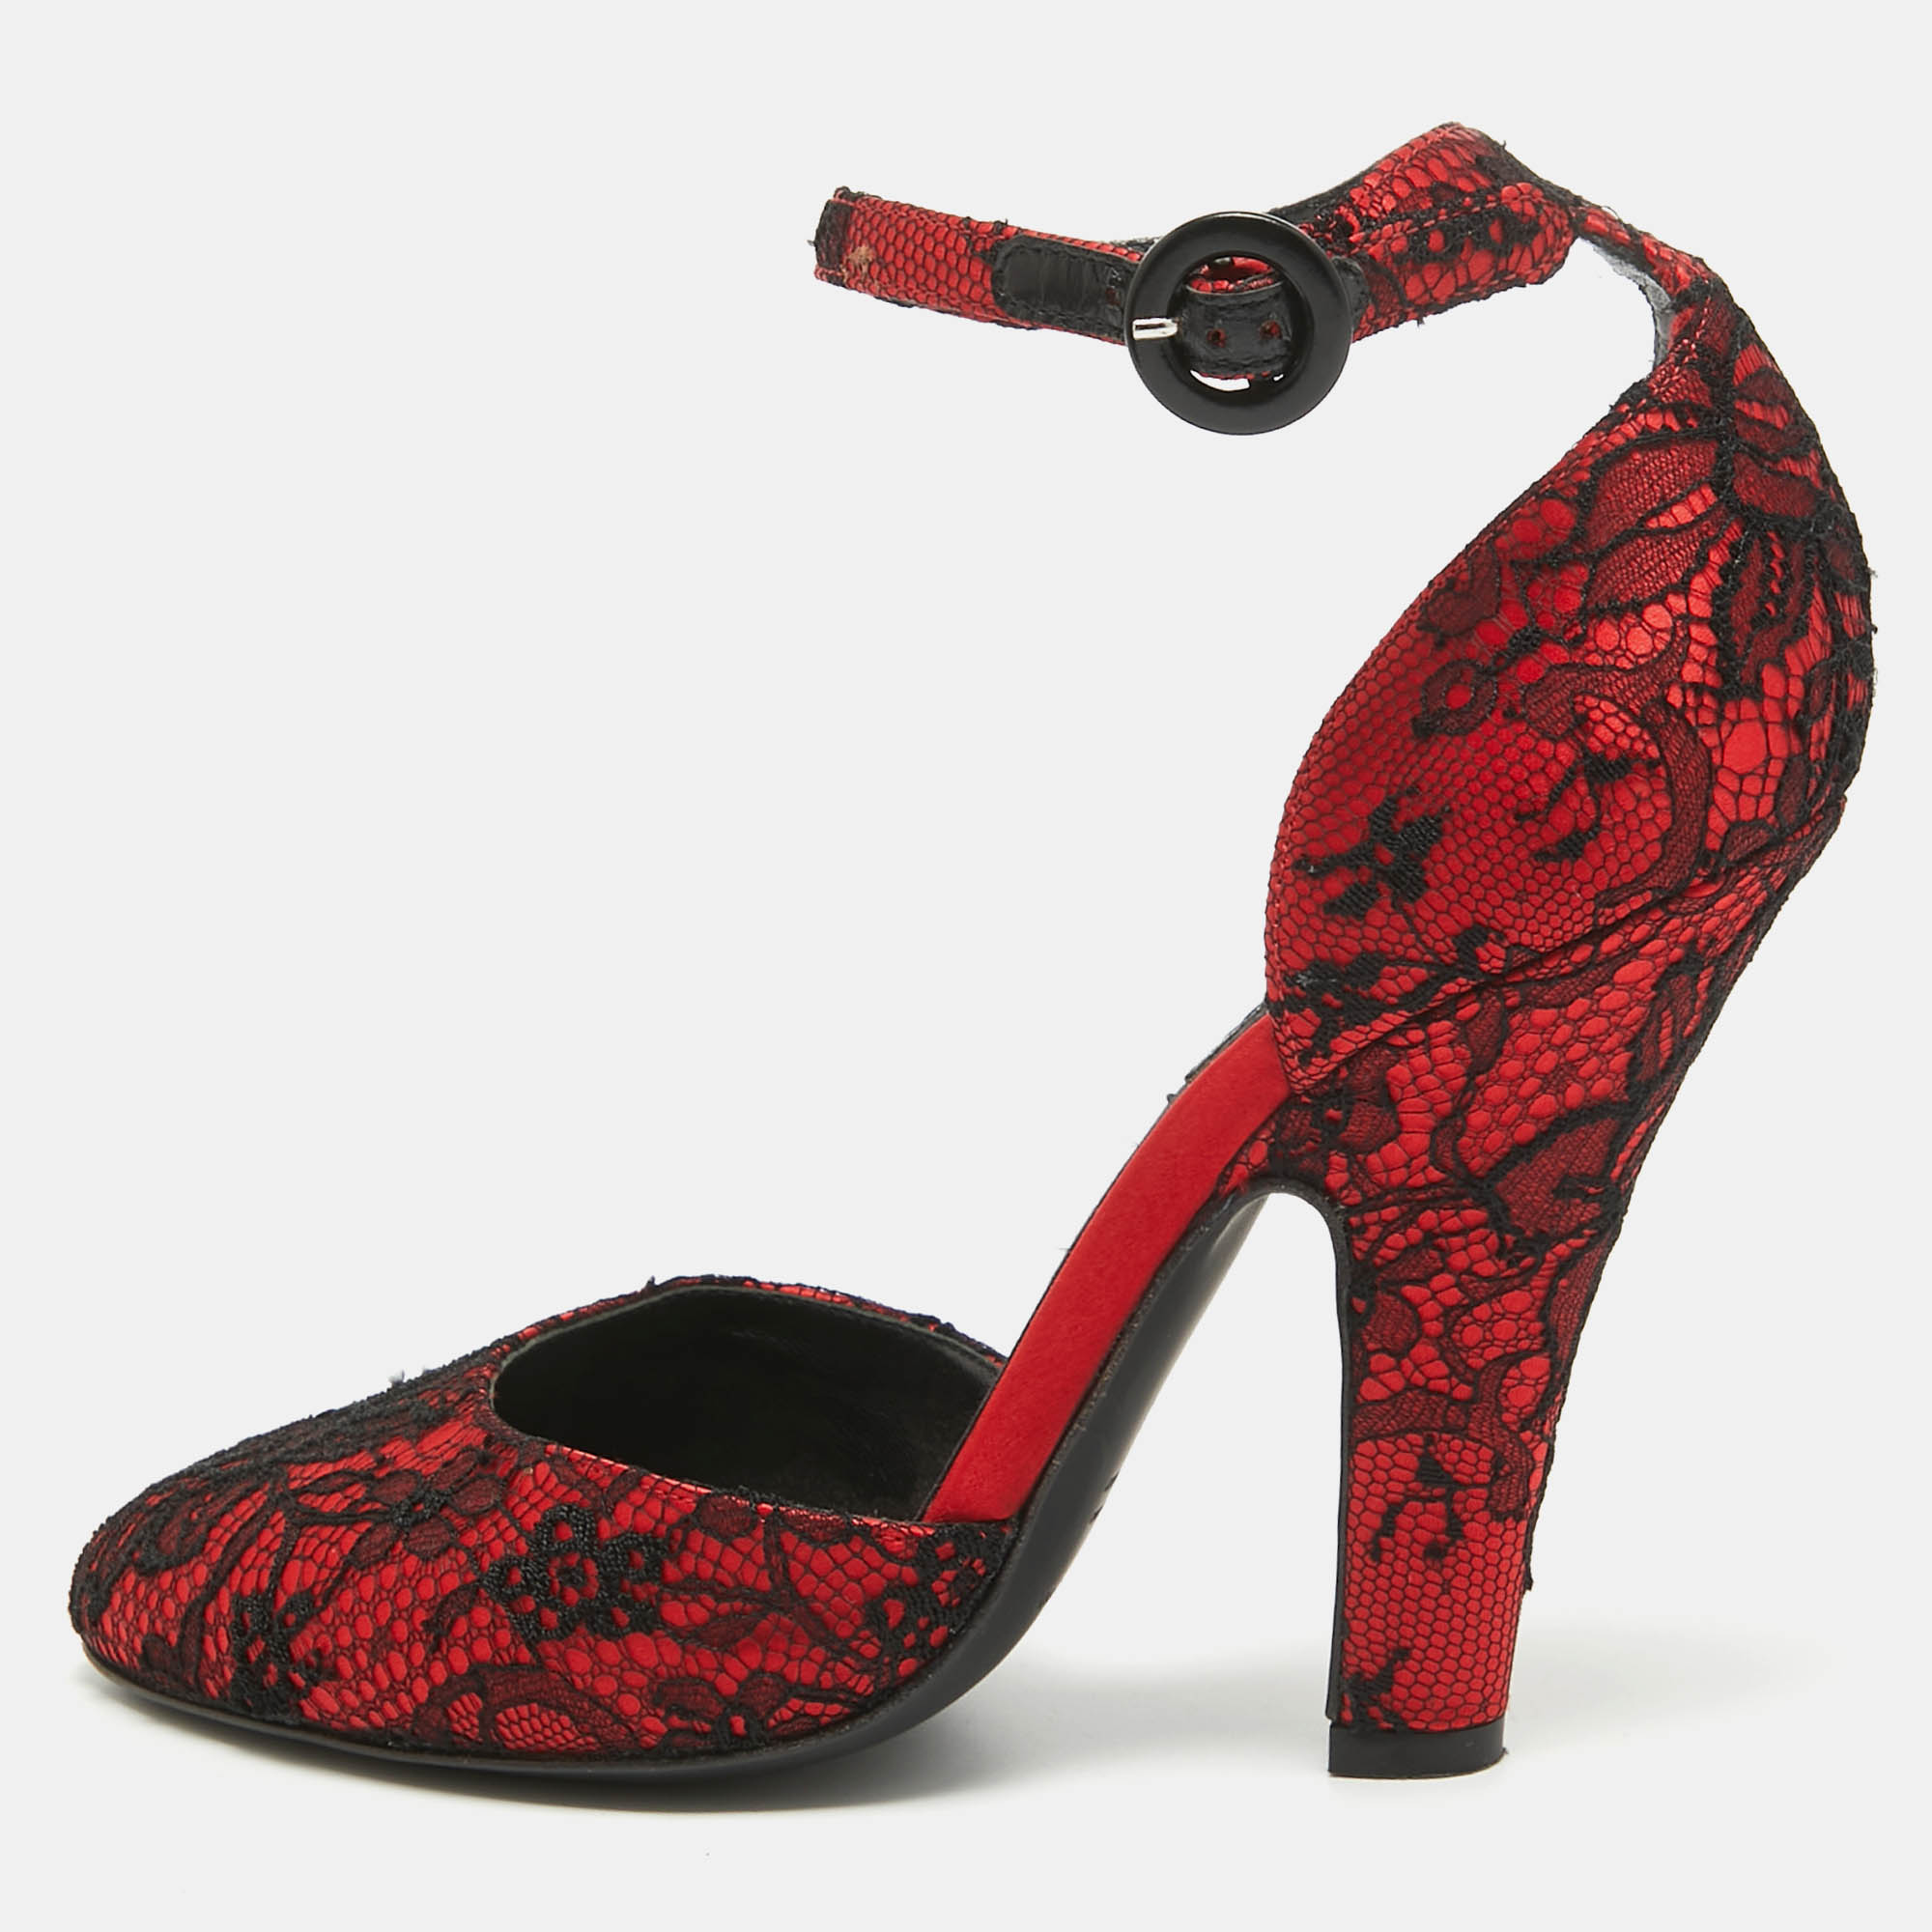 Dolce & gabbana red/black lace and mesh ankle strap pumps size 38